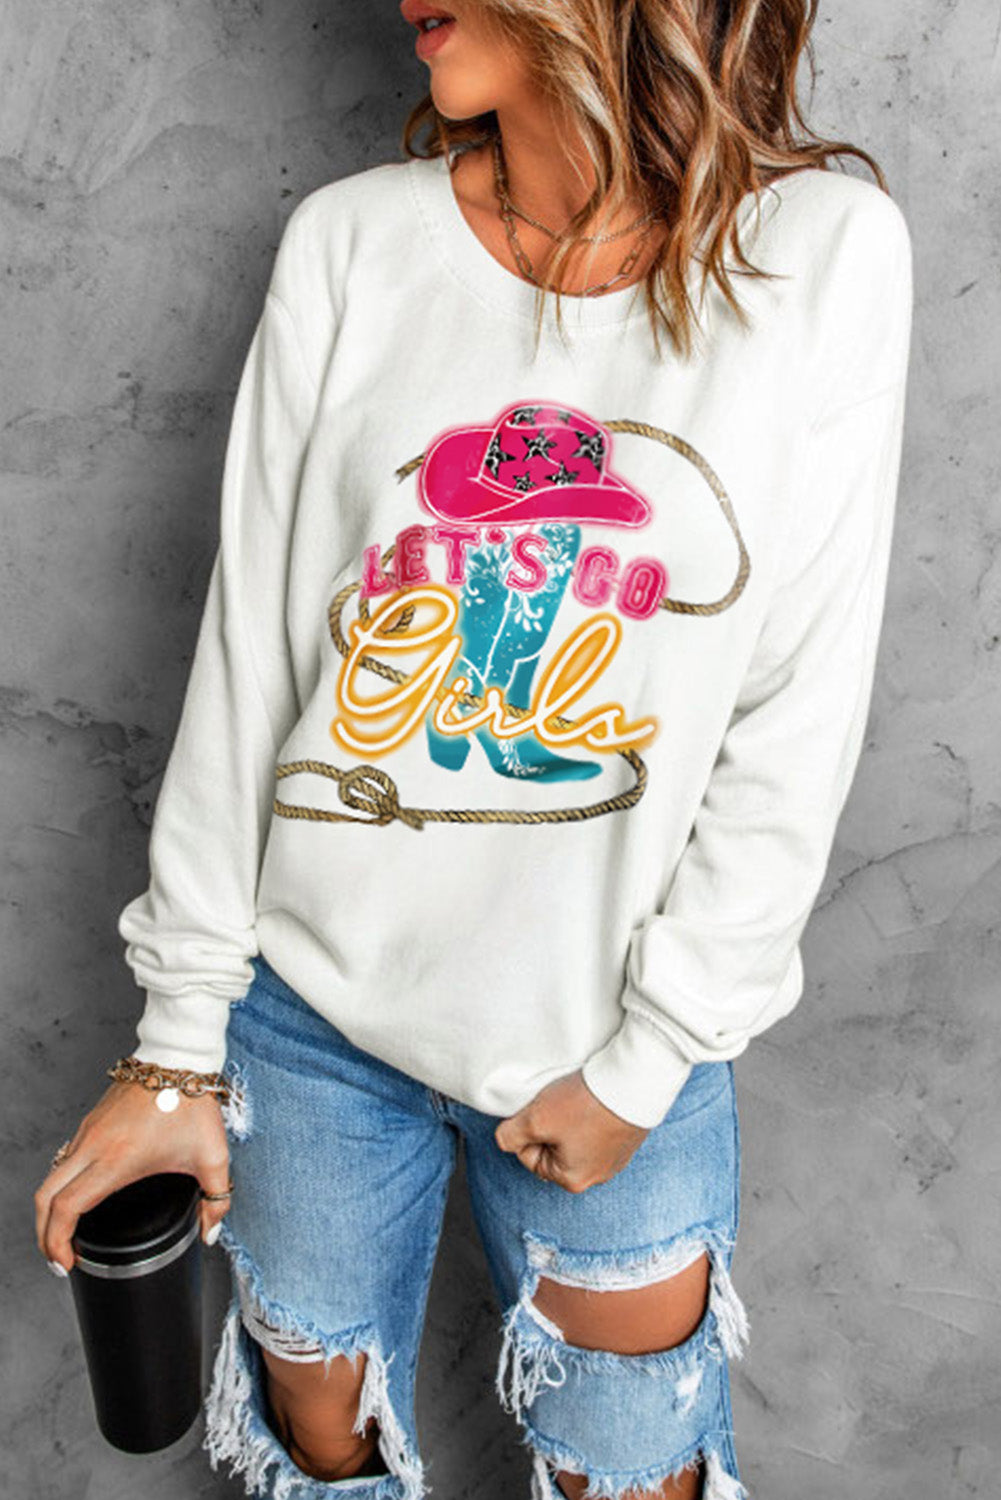 LET'S GO GIRLS Graphic Round Neck Sweatshirt - ONLINE ONLY 2-10 DAY SHIPPING